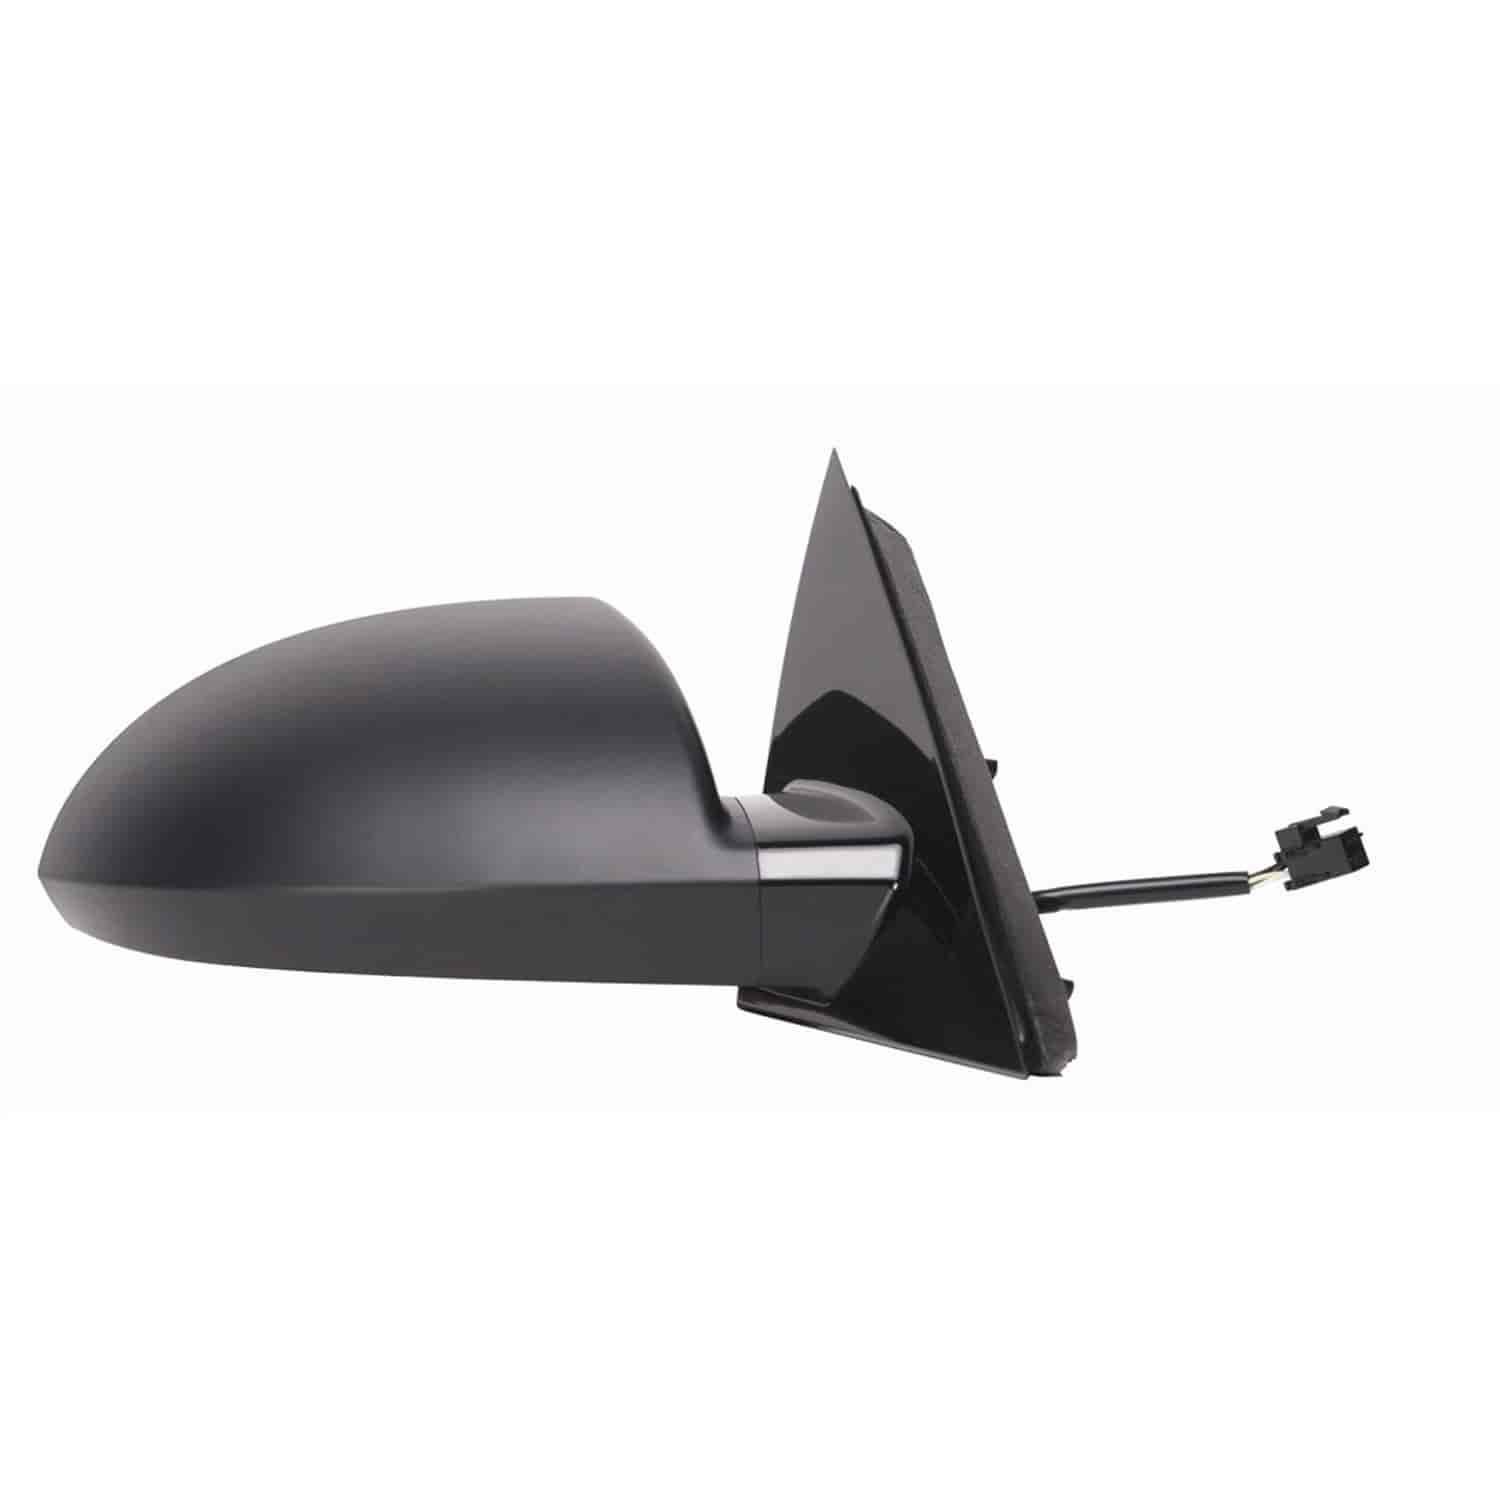 OEM Style Replacement mirror for 06-14 Chevy Impala / 2014 Impala Limited Models only passenger side